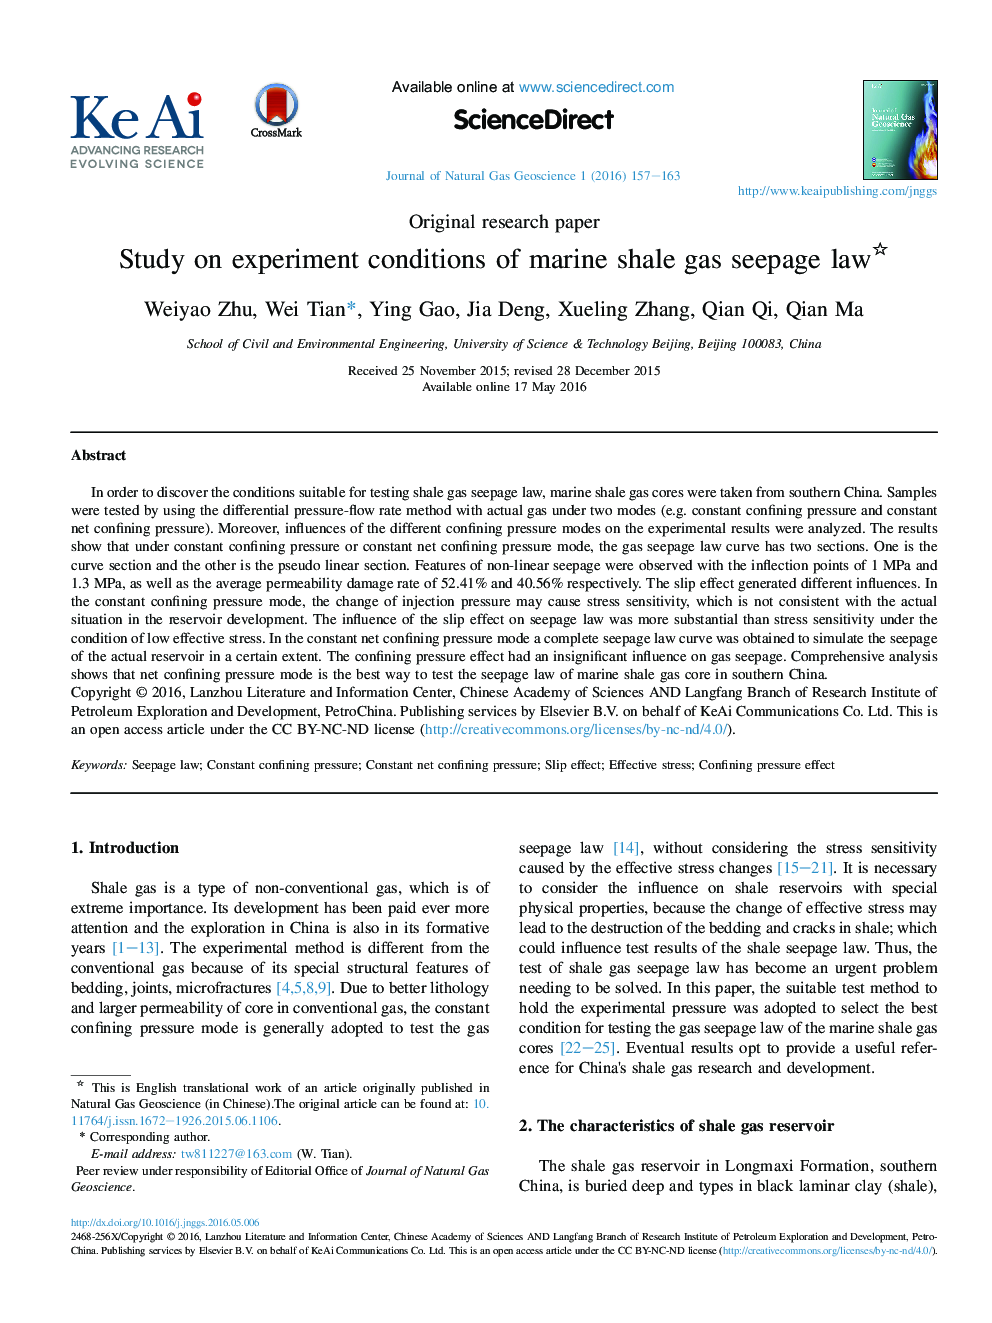 Study on experiment conditions of marine shale gas seepage law 